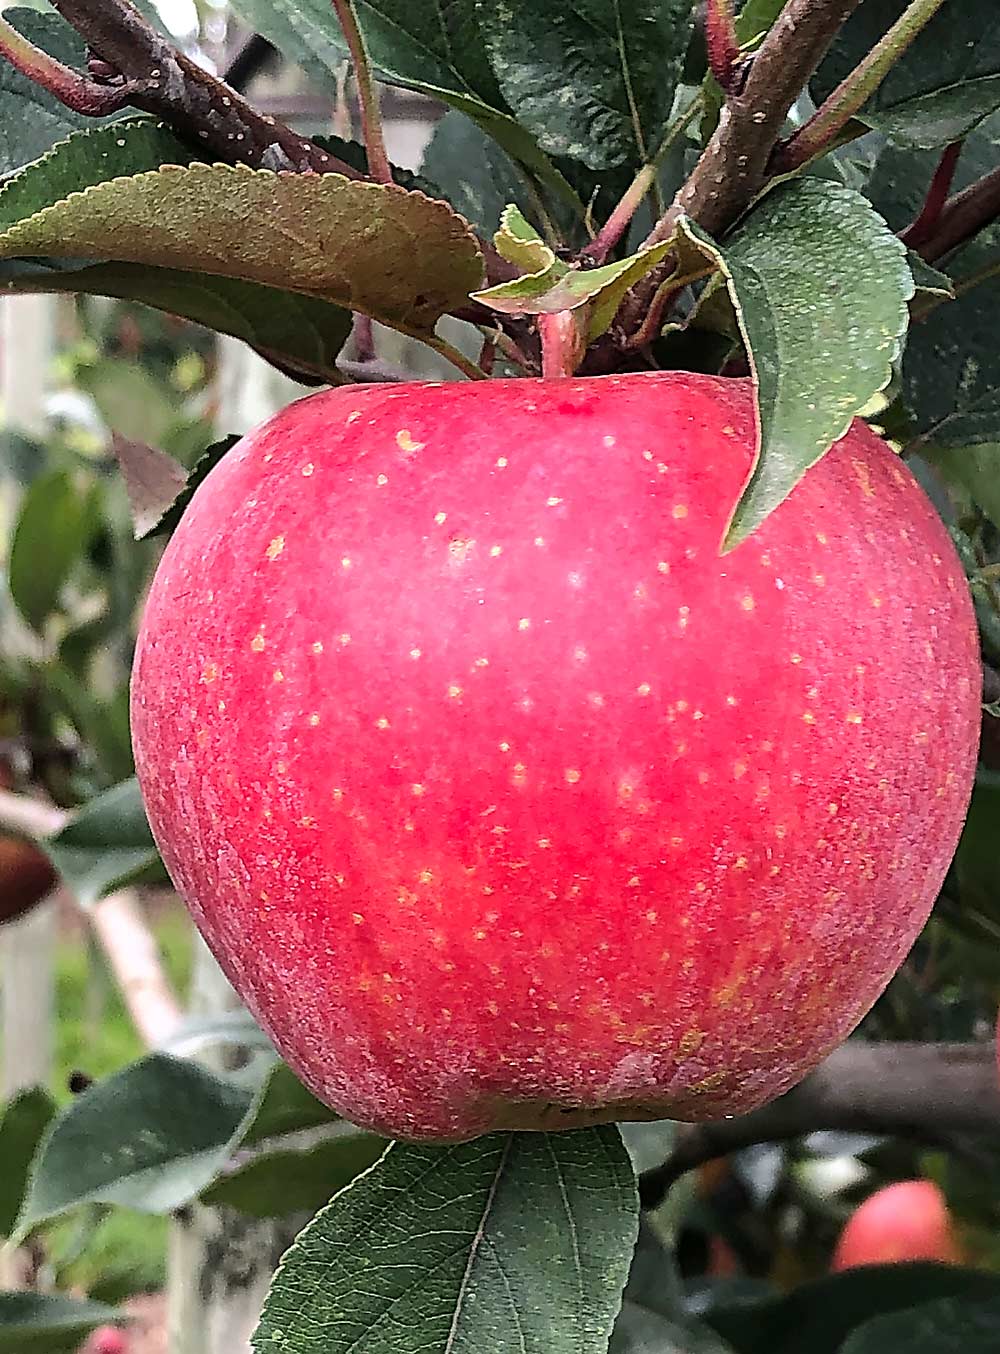 A cross between Honeycrisp and Cripps Pink, R10-45, which is marketed by Hess Bros. as WildTwist, awaits harvest in New York in mid-October 2021. (Courtesy Hess Brothers)